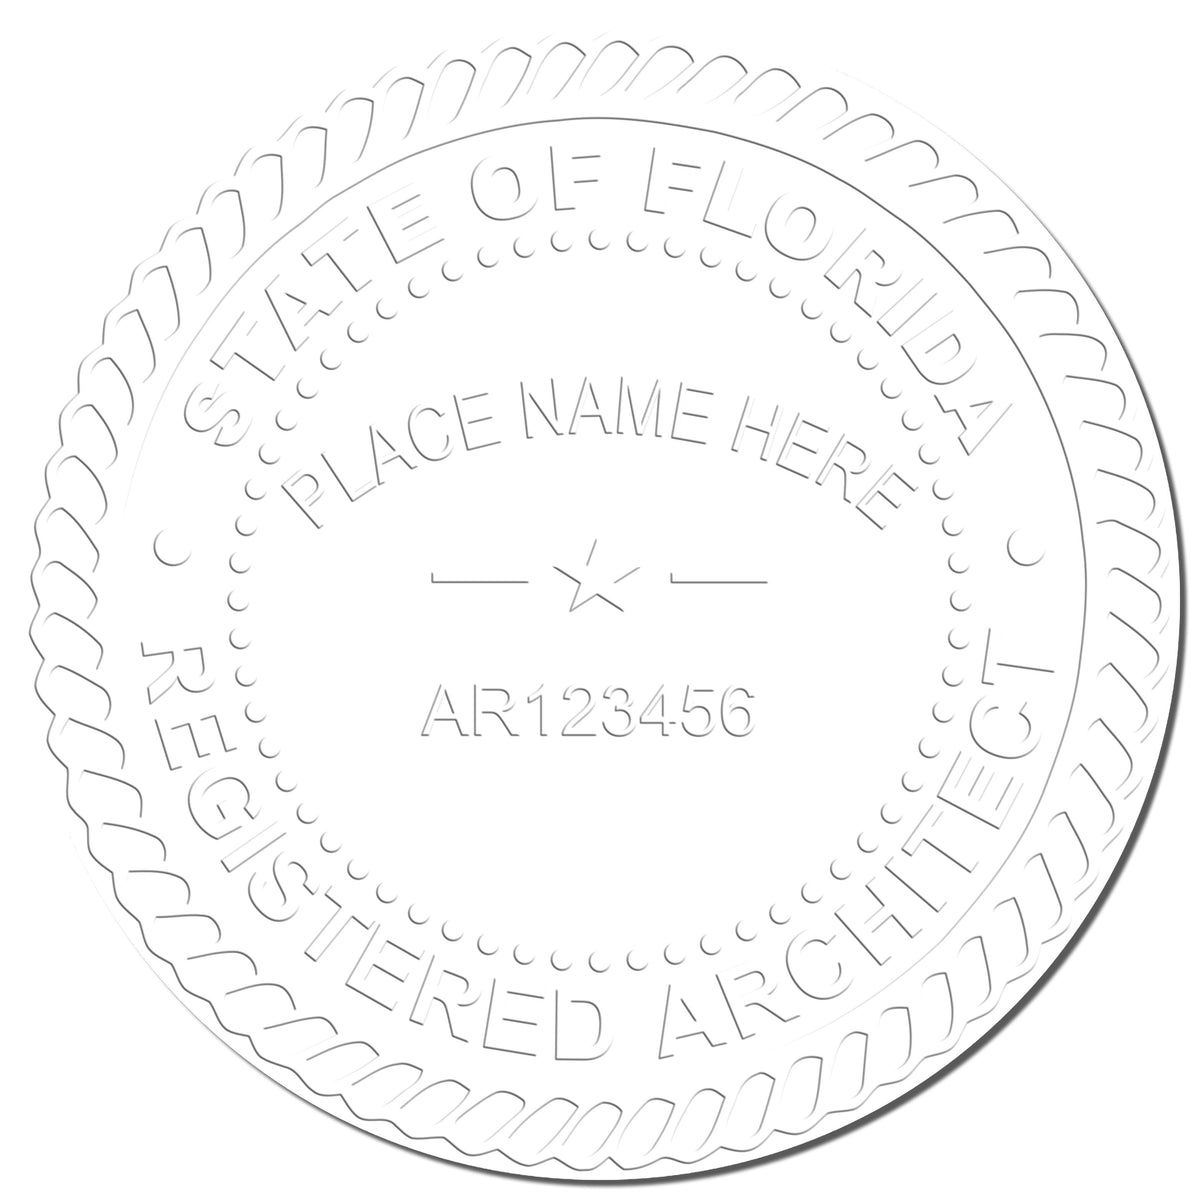 This paper is stamped with a sample imprint of the State of Florida Architectural Seal Embosser, signifying its quality and reliability.